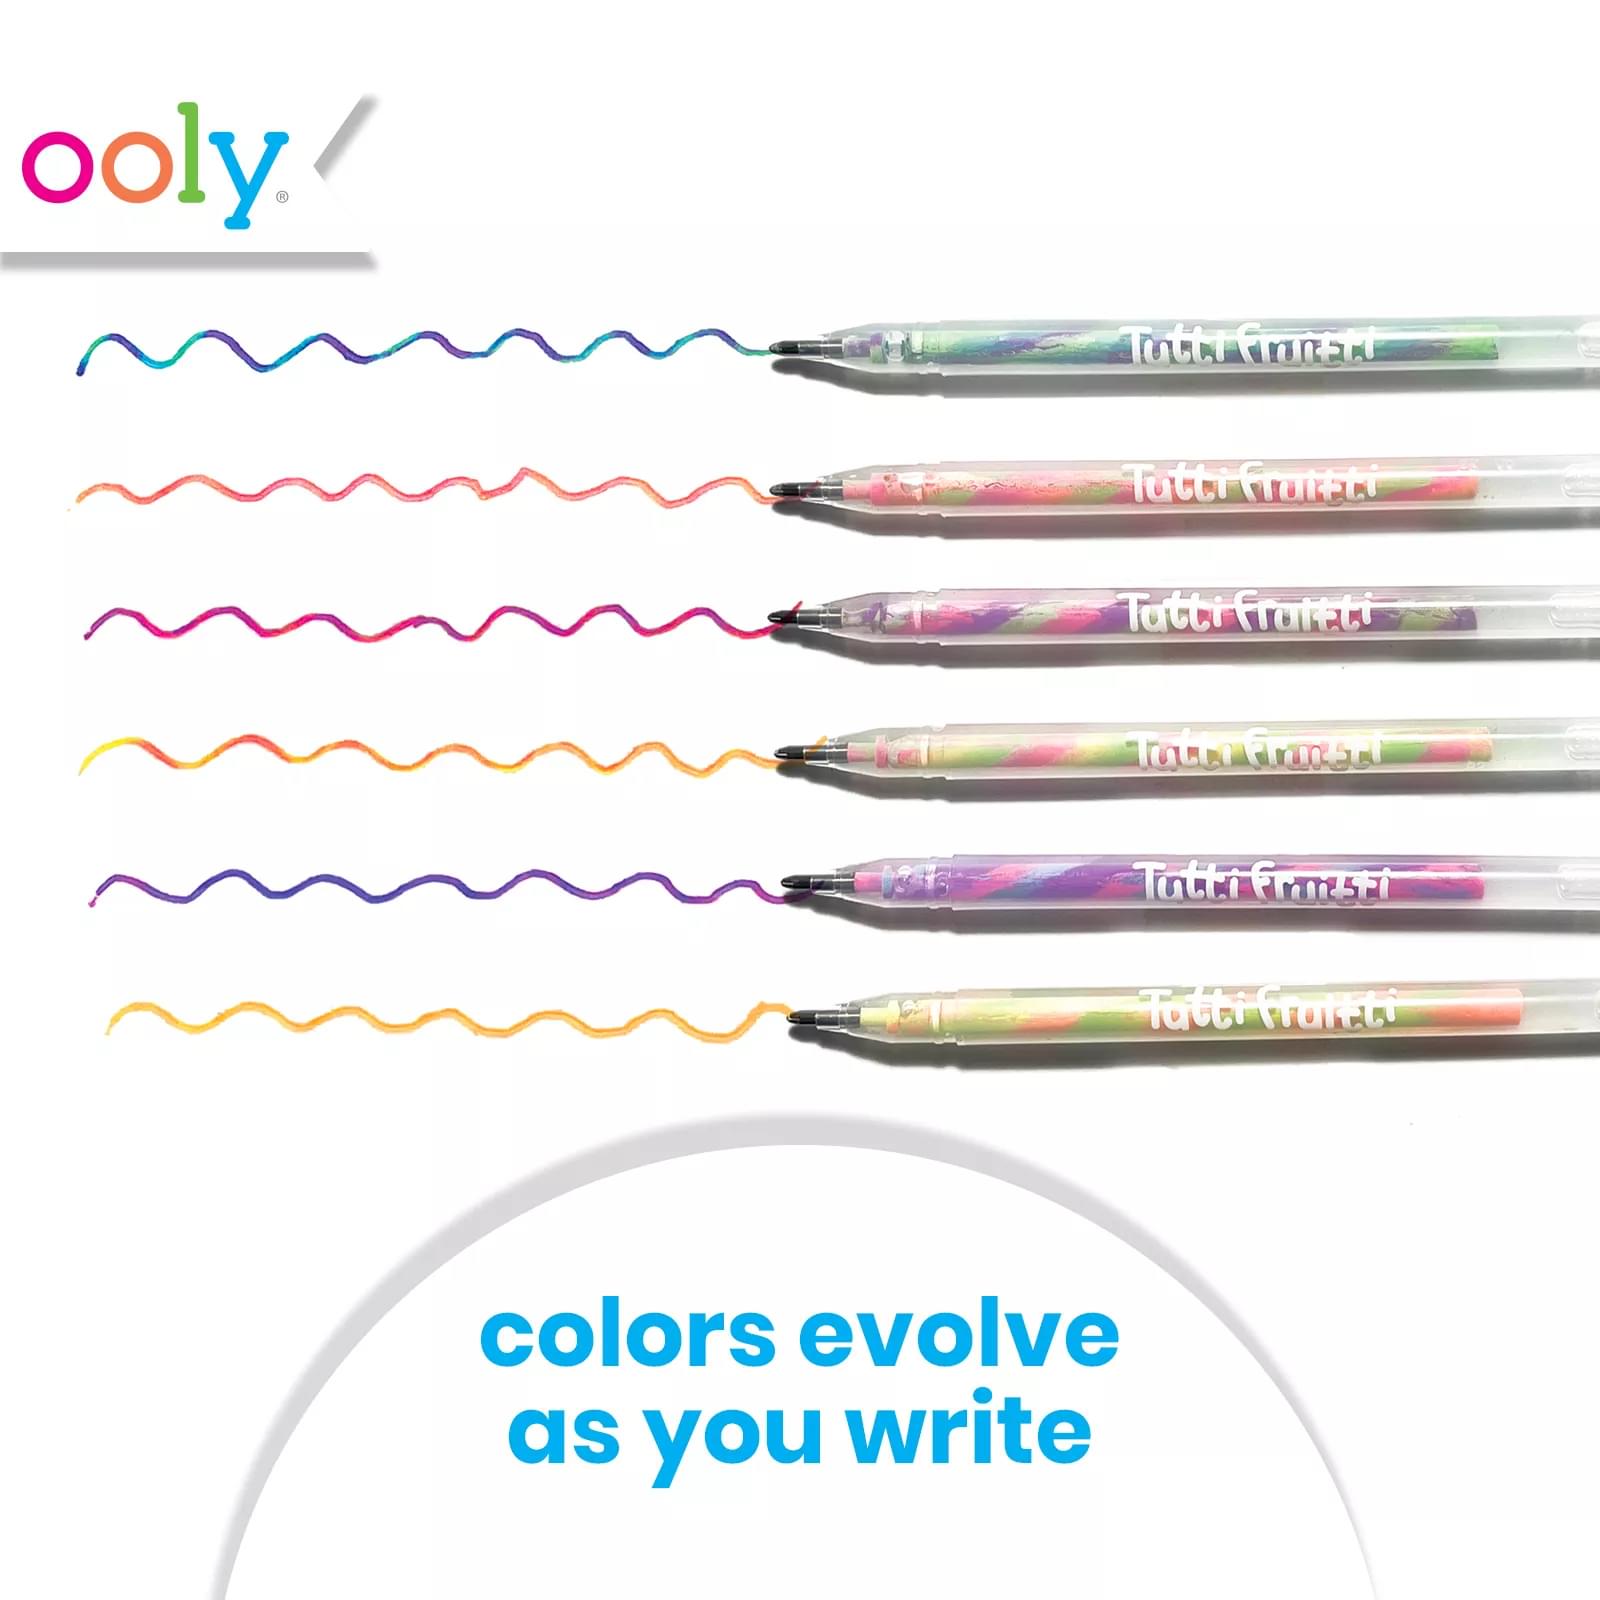 Totally Taffy Pastel Gel Pens from Ooly (was International